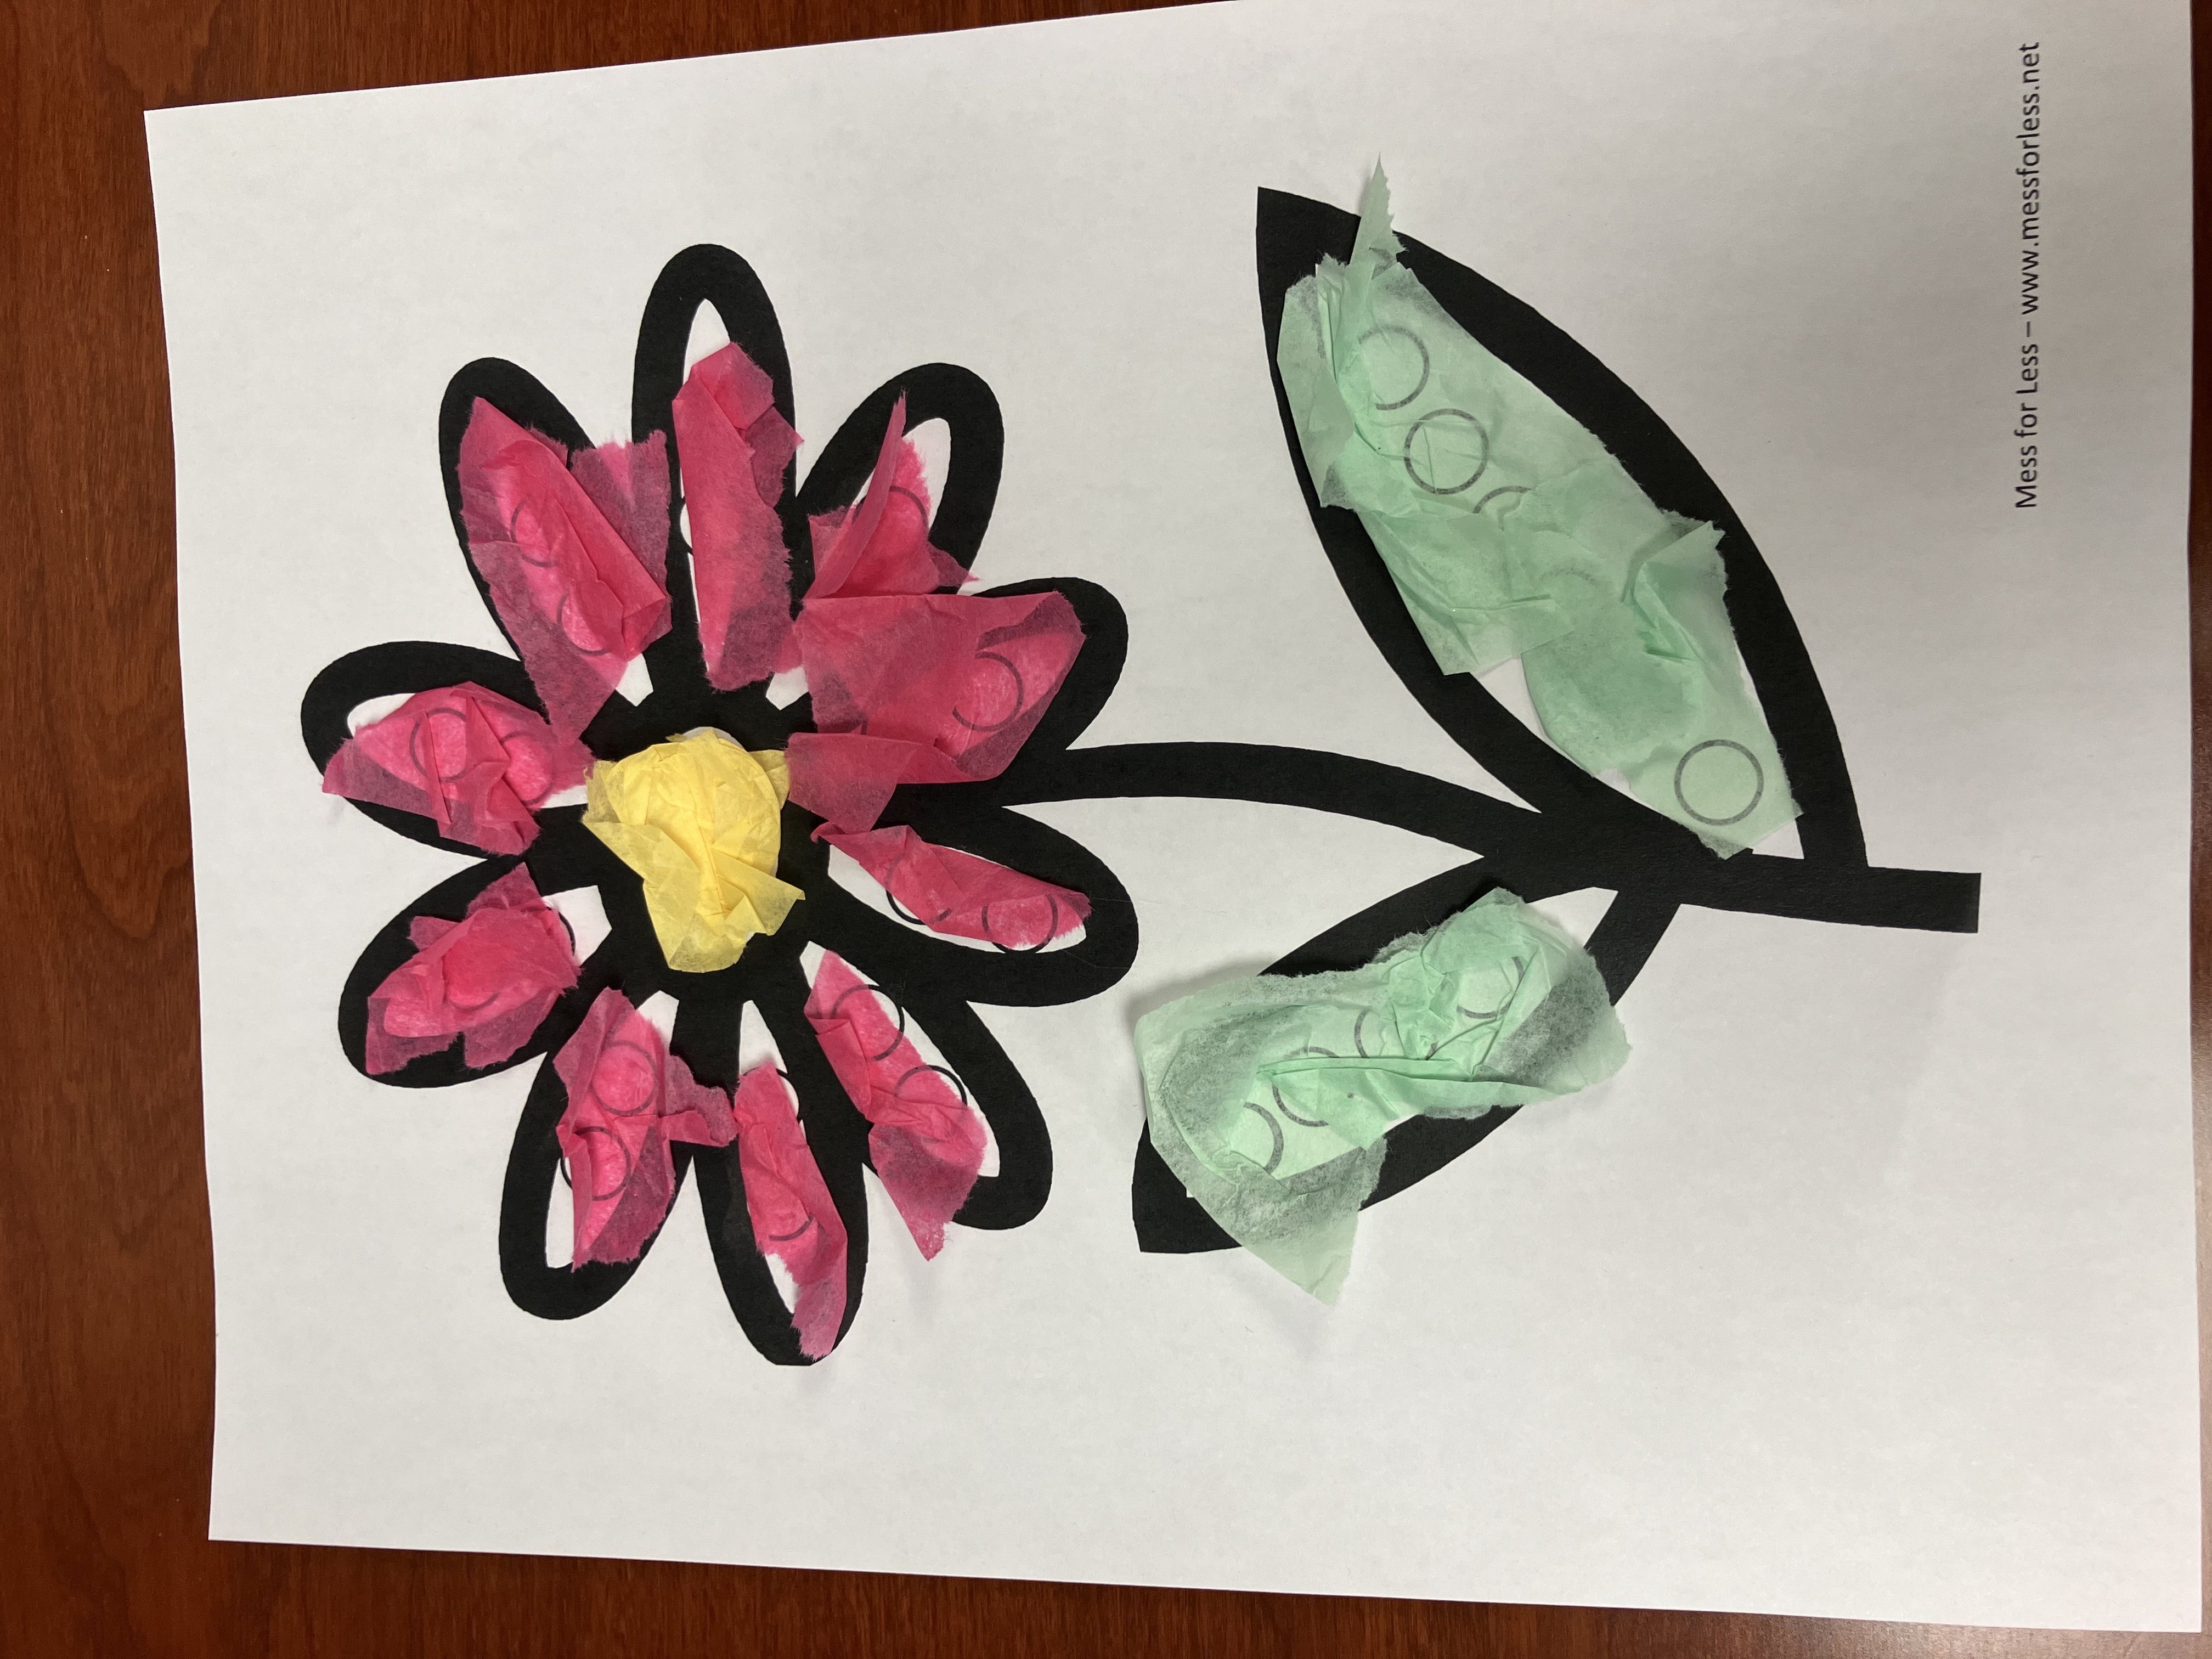 Blossoming Minds: Spring Into Creativity with Connecting NJ's Flower-themed Early Childhood Craft!